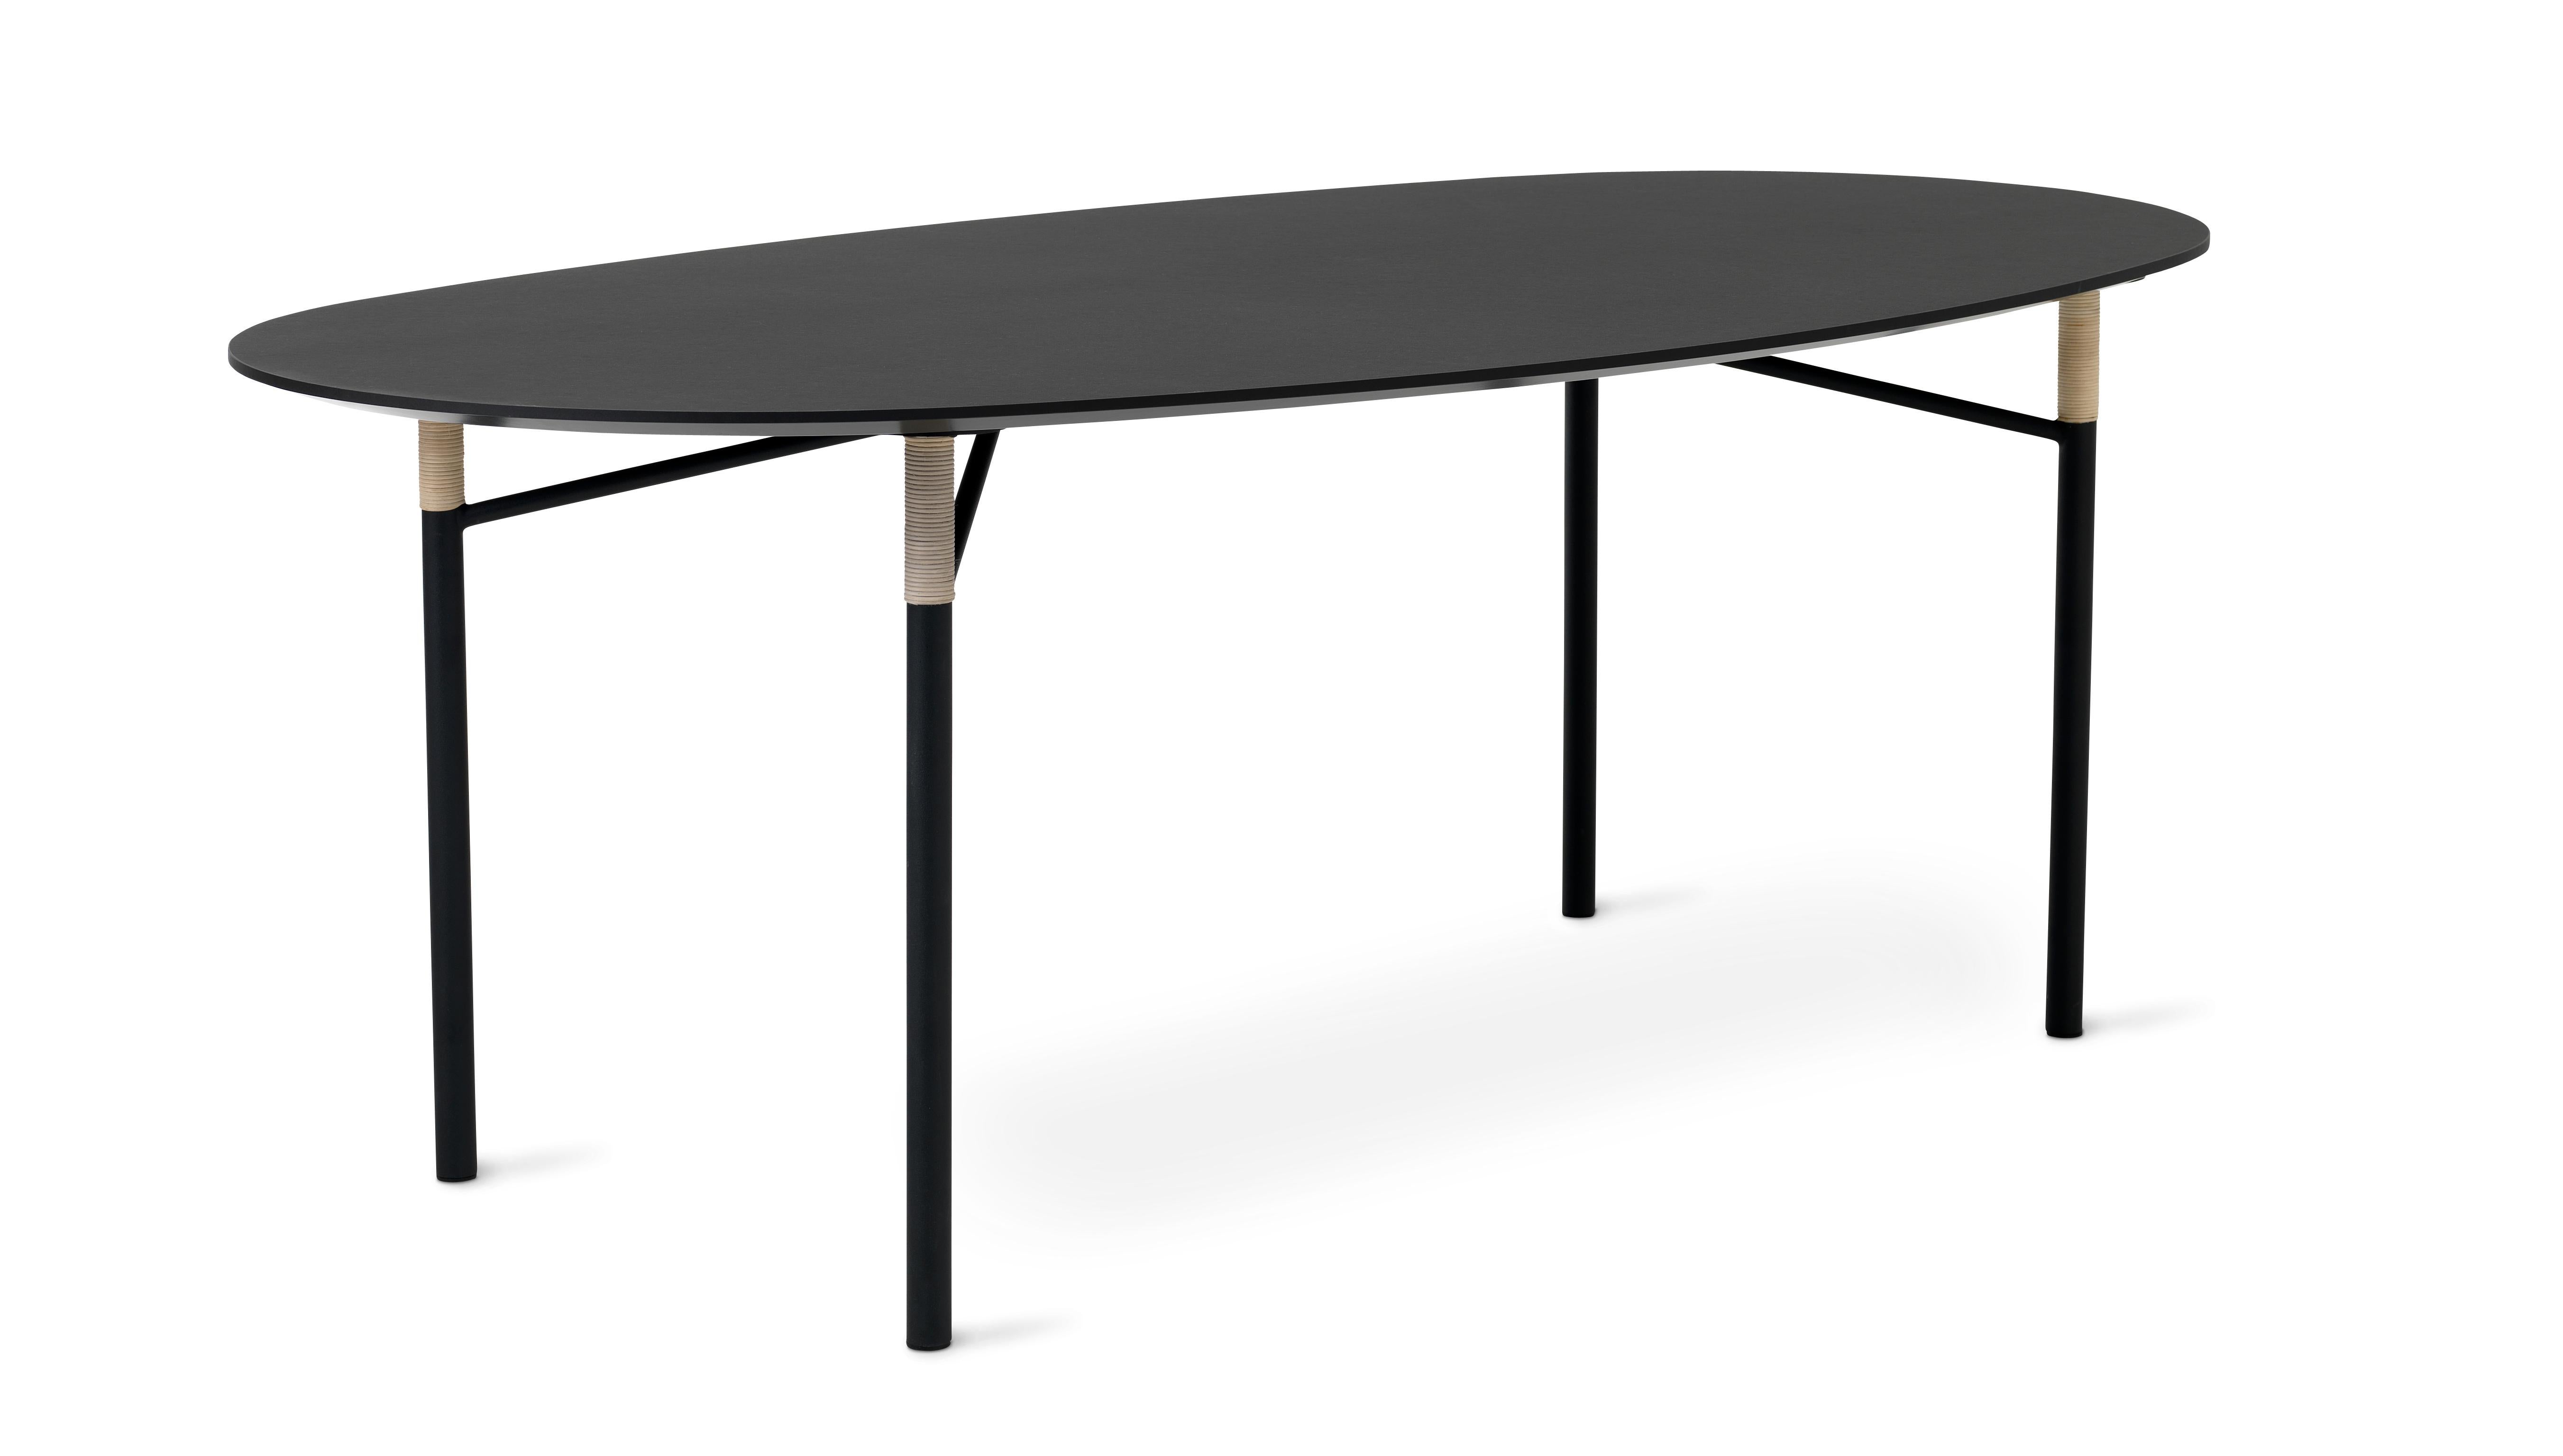 Elegant elliptical dining table with a linoleum top and a warm, relevant design. The elliptical shape creates a lovely sense of connectedness, encouraging conversation and togetherness when family and friends gather round the table for a meal or to